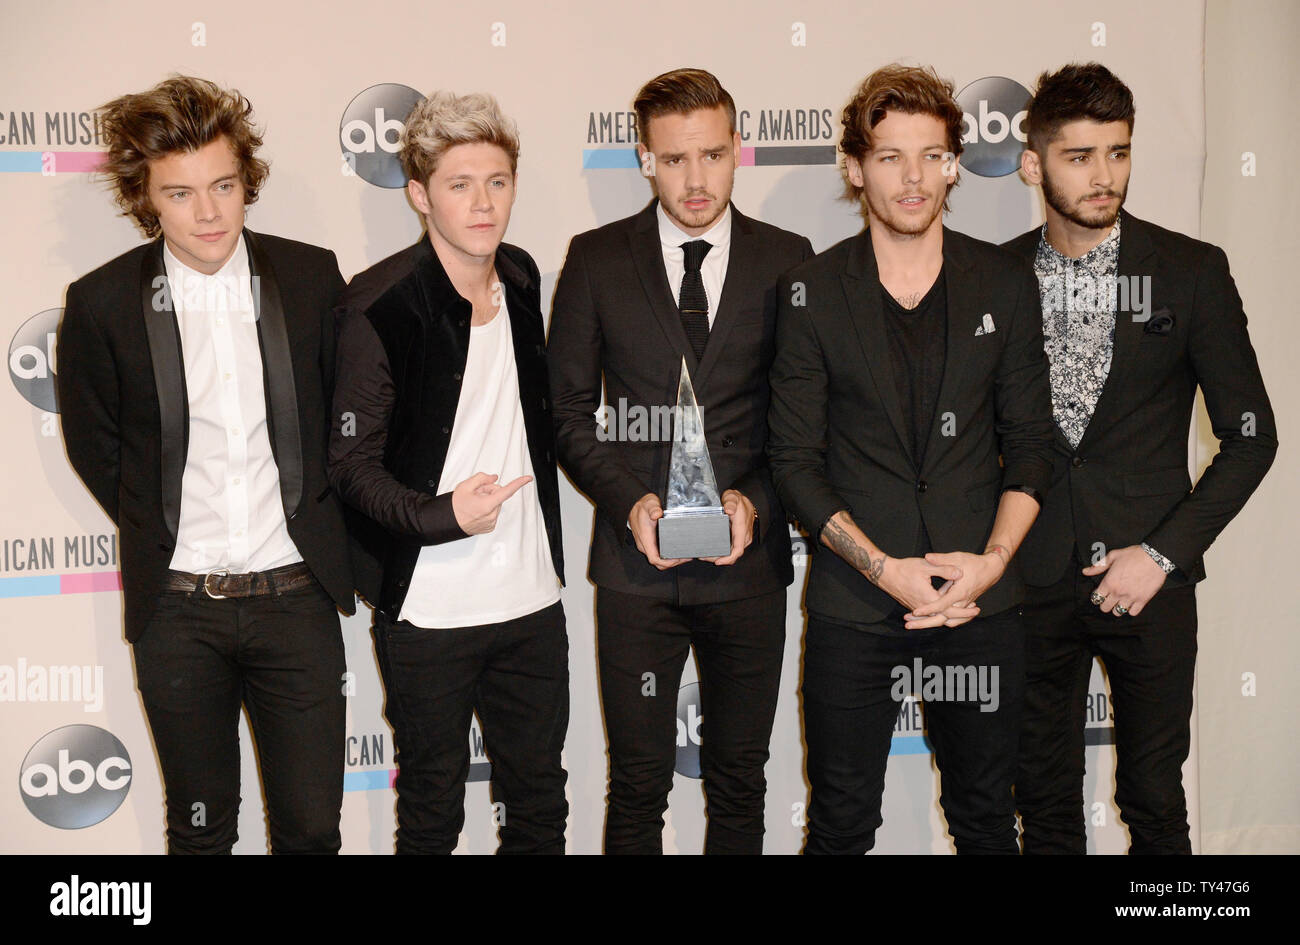 (L-R) Recording artists Harry Styles, Niall Horan, Liam Payne, Louis Tomlinson, and Zayn Malik of music group One Direction hold the award they won for Favorite Album - Pop/Rock for 'Take Me Home' and Favorite Band, Duo or Group - Pop/Rock, backstage at the 41st annual American Music Awards held at Nokia Theatre L.A. Live in Los Angeles on November 24, 2013.  UPI/Phil McCarten Stock Photo